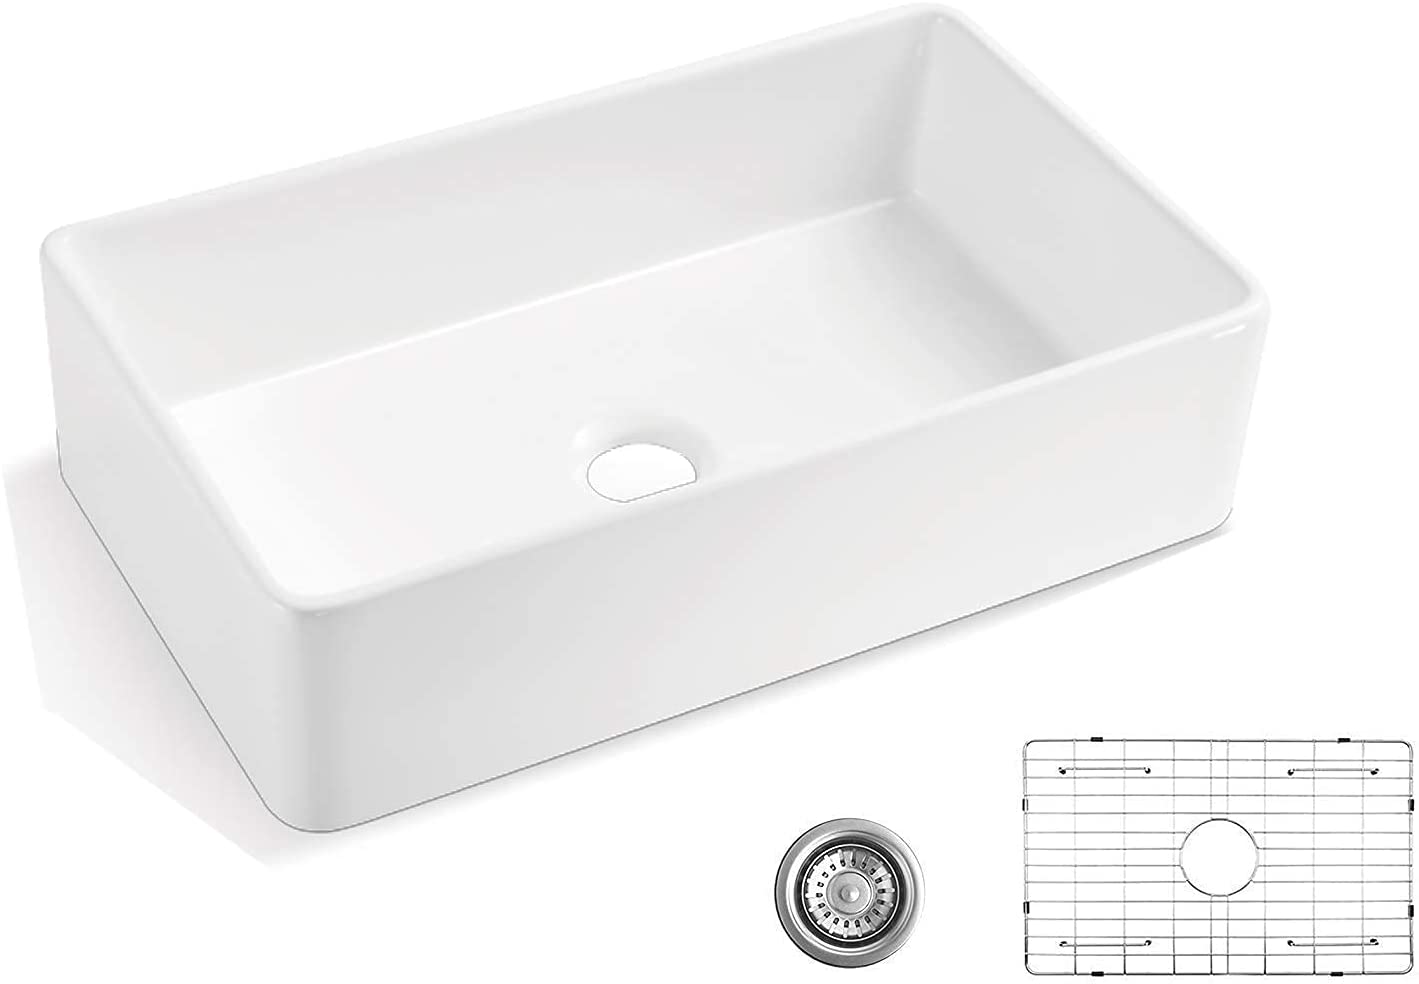 33 White Farmhouse Sink, Fireclay 33 Apron Front sink, Luxury Single Basin Kitchen Sink, 33 inch Farmhouse Sink, White Ceramic Sink with Stainless Steel Grid and Strainer